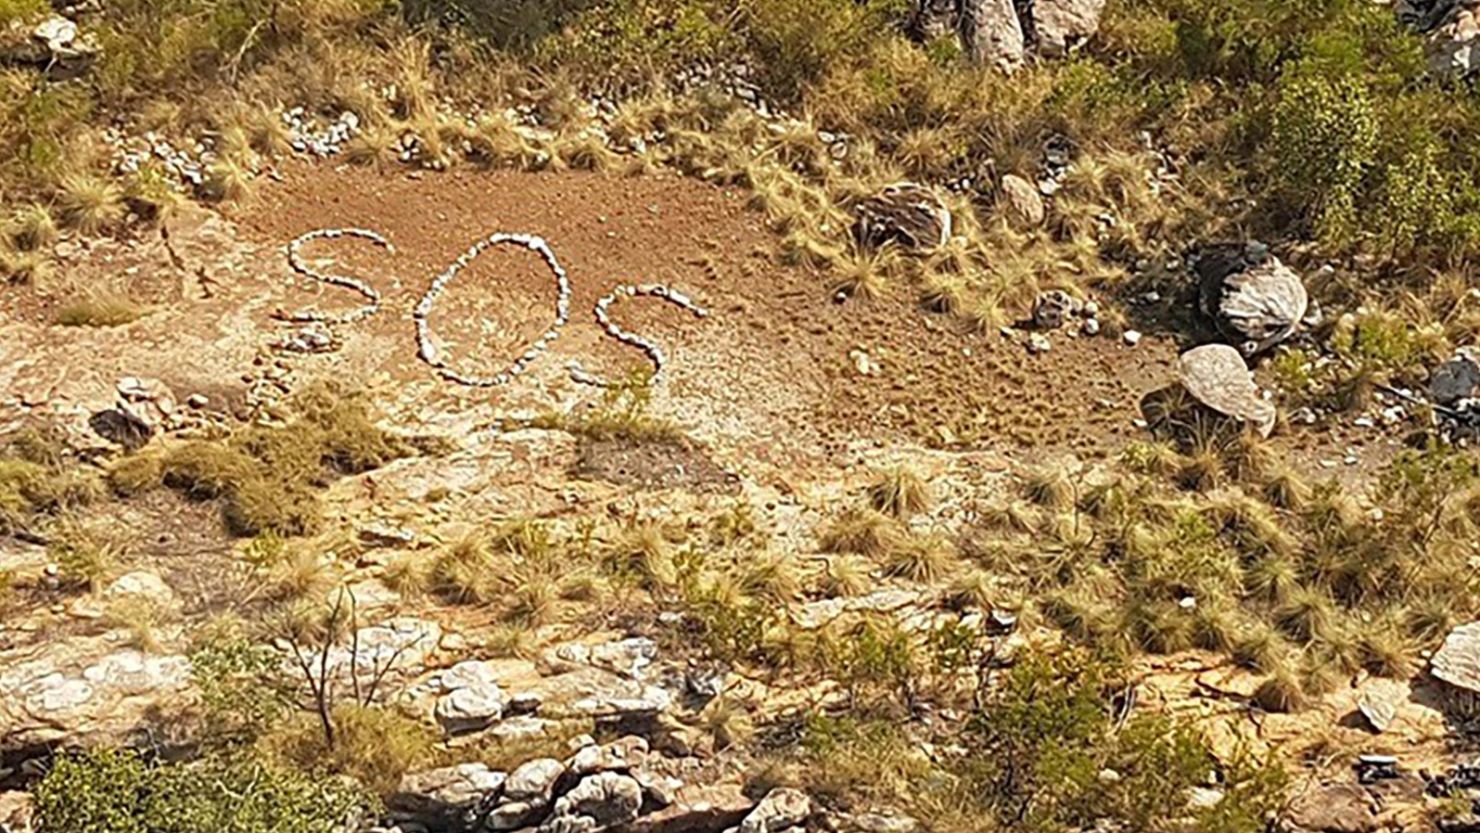 A mystery SOS sign spotted by a pilot has prompted fears of missing people in Australia. 